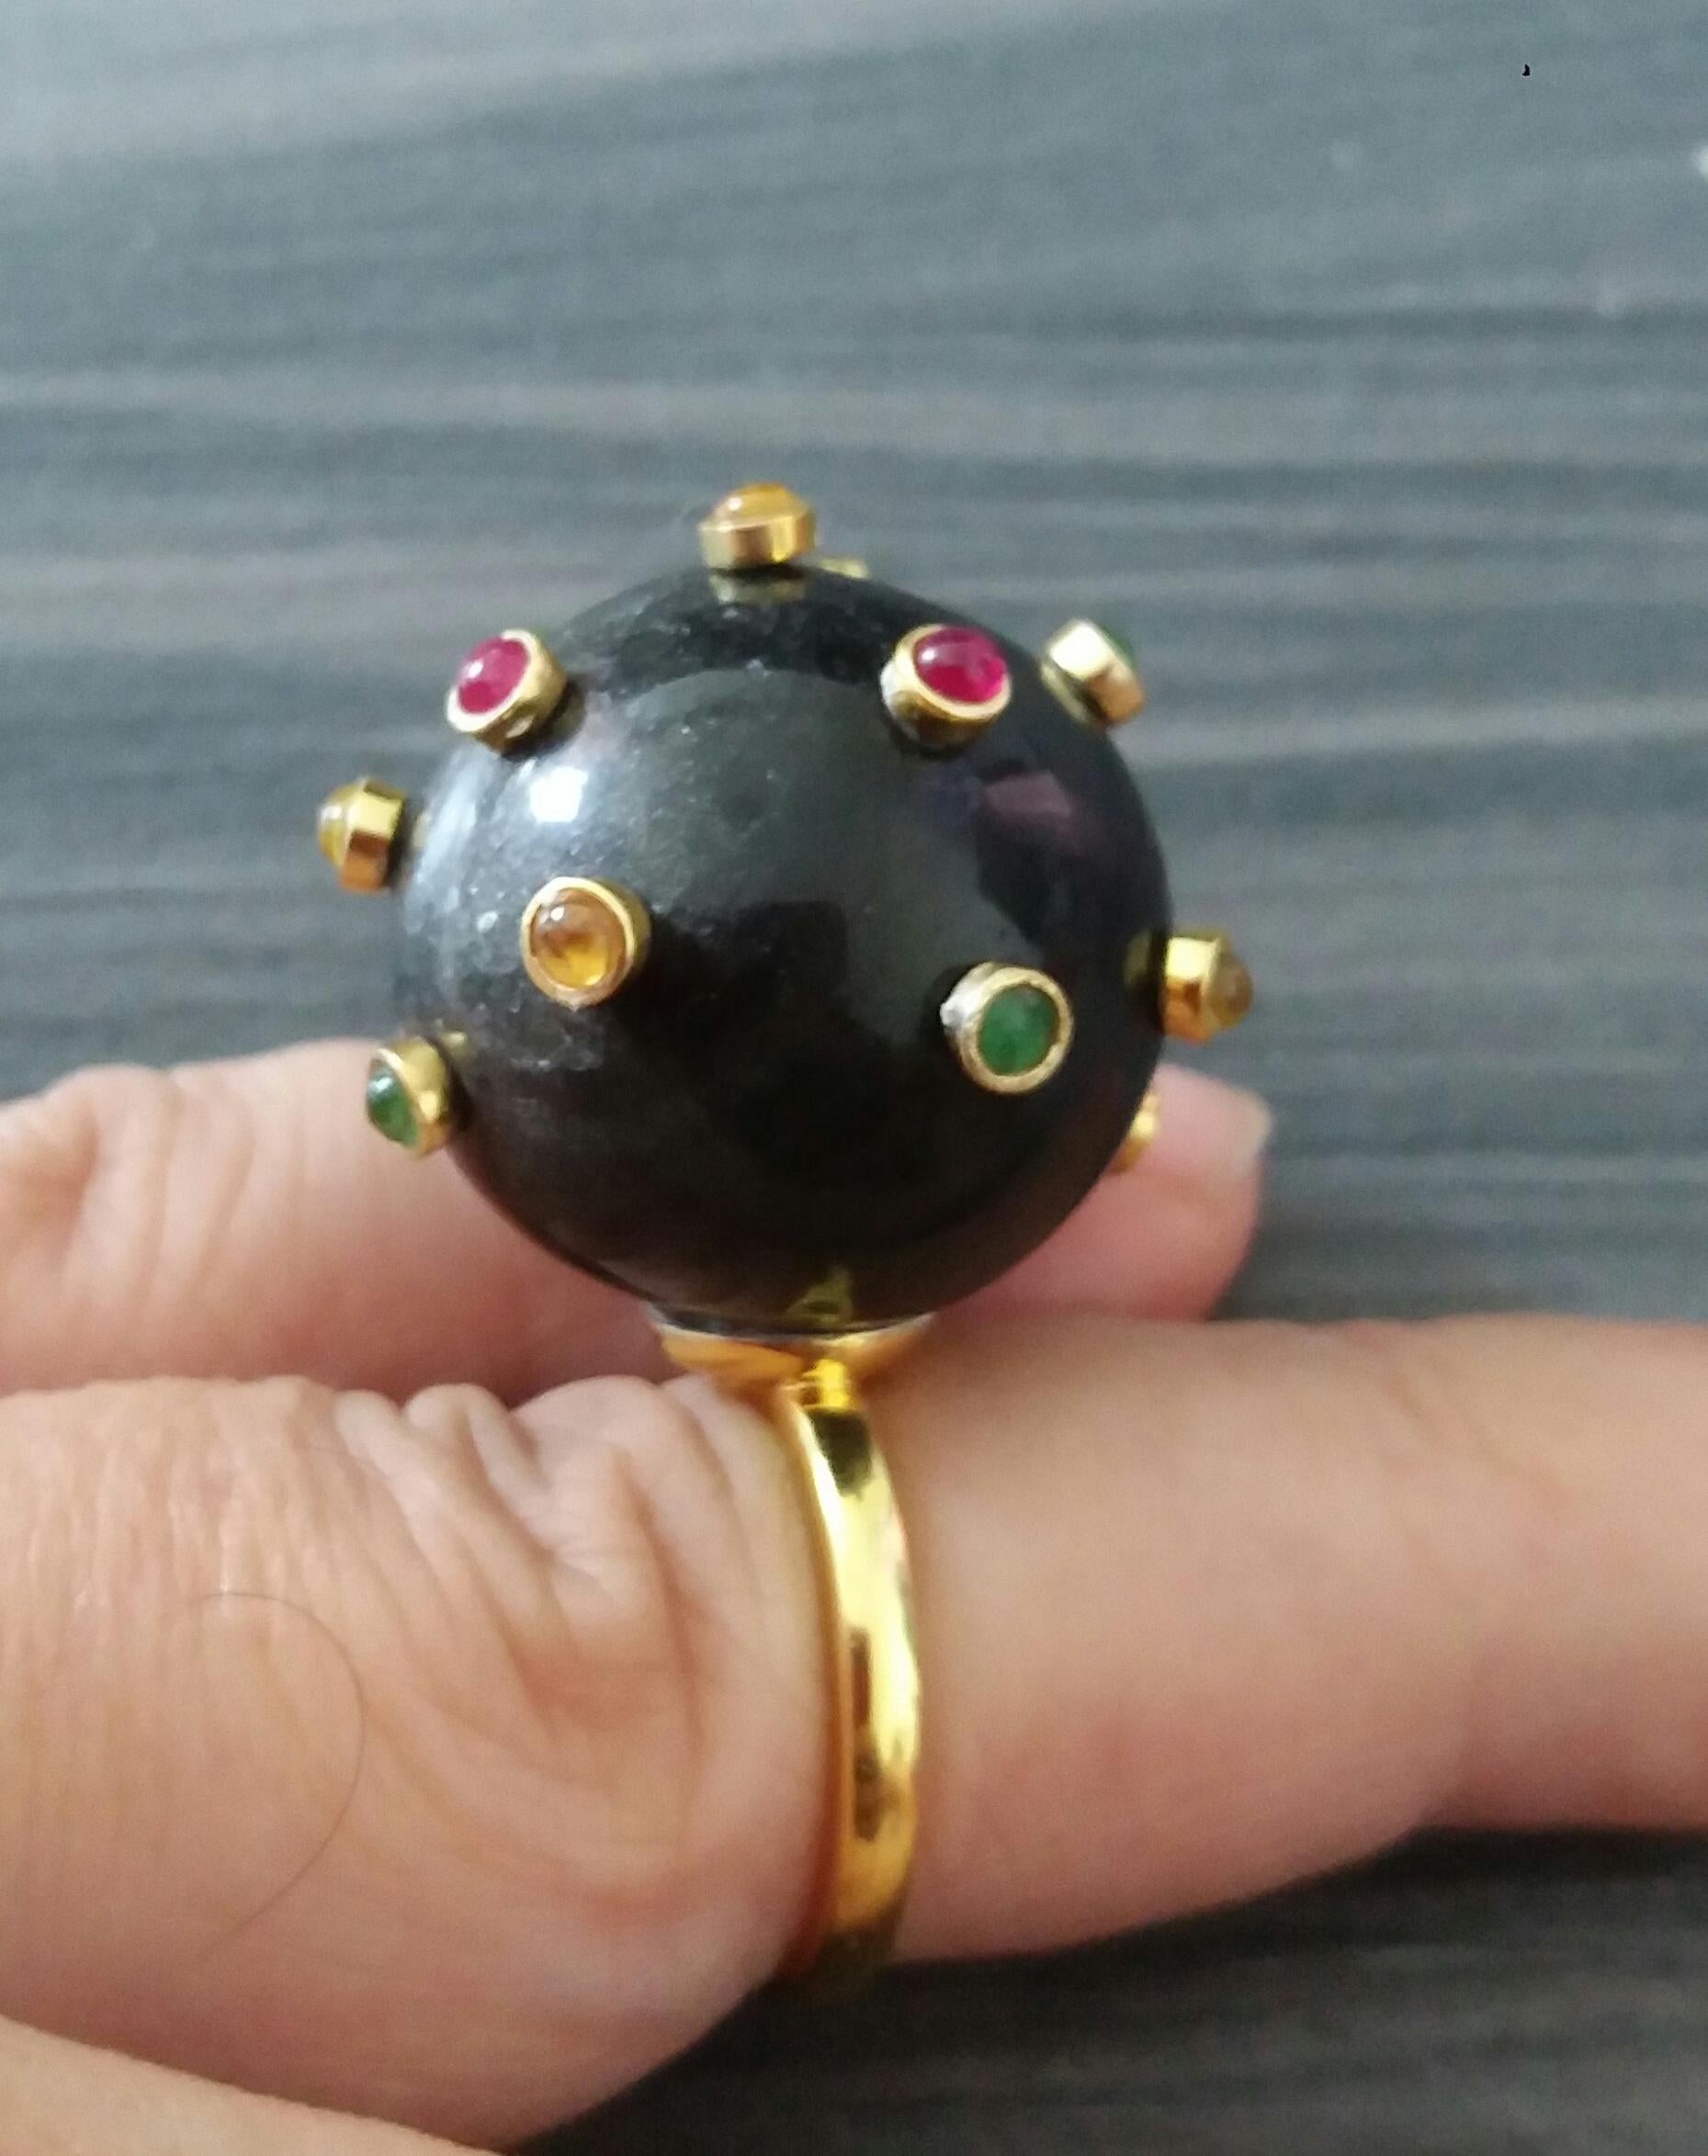 Extremely Stylish and Unique Ring composed by a Natural Quartz  Sphere measuring 25 mm in diameter and weighing 107 Carats ,decorated with 15 small round Rubies,Emeralds and Yellow Sapphires set in 14K yellow gold bezels.

In 1978 our workshop